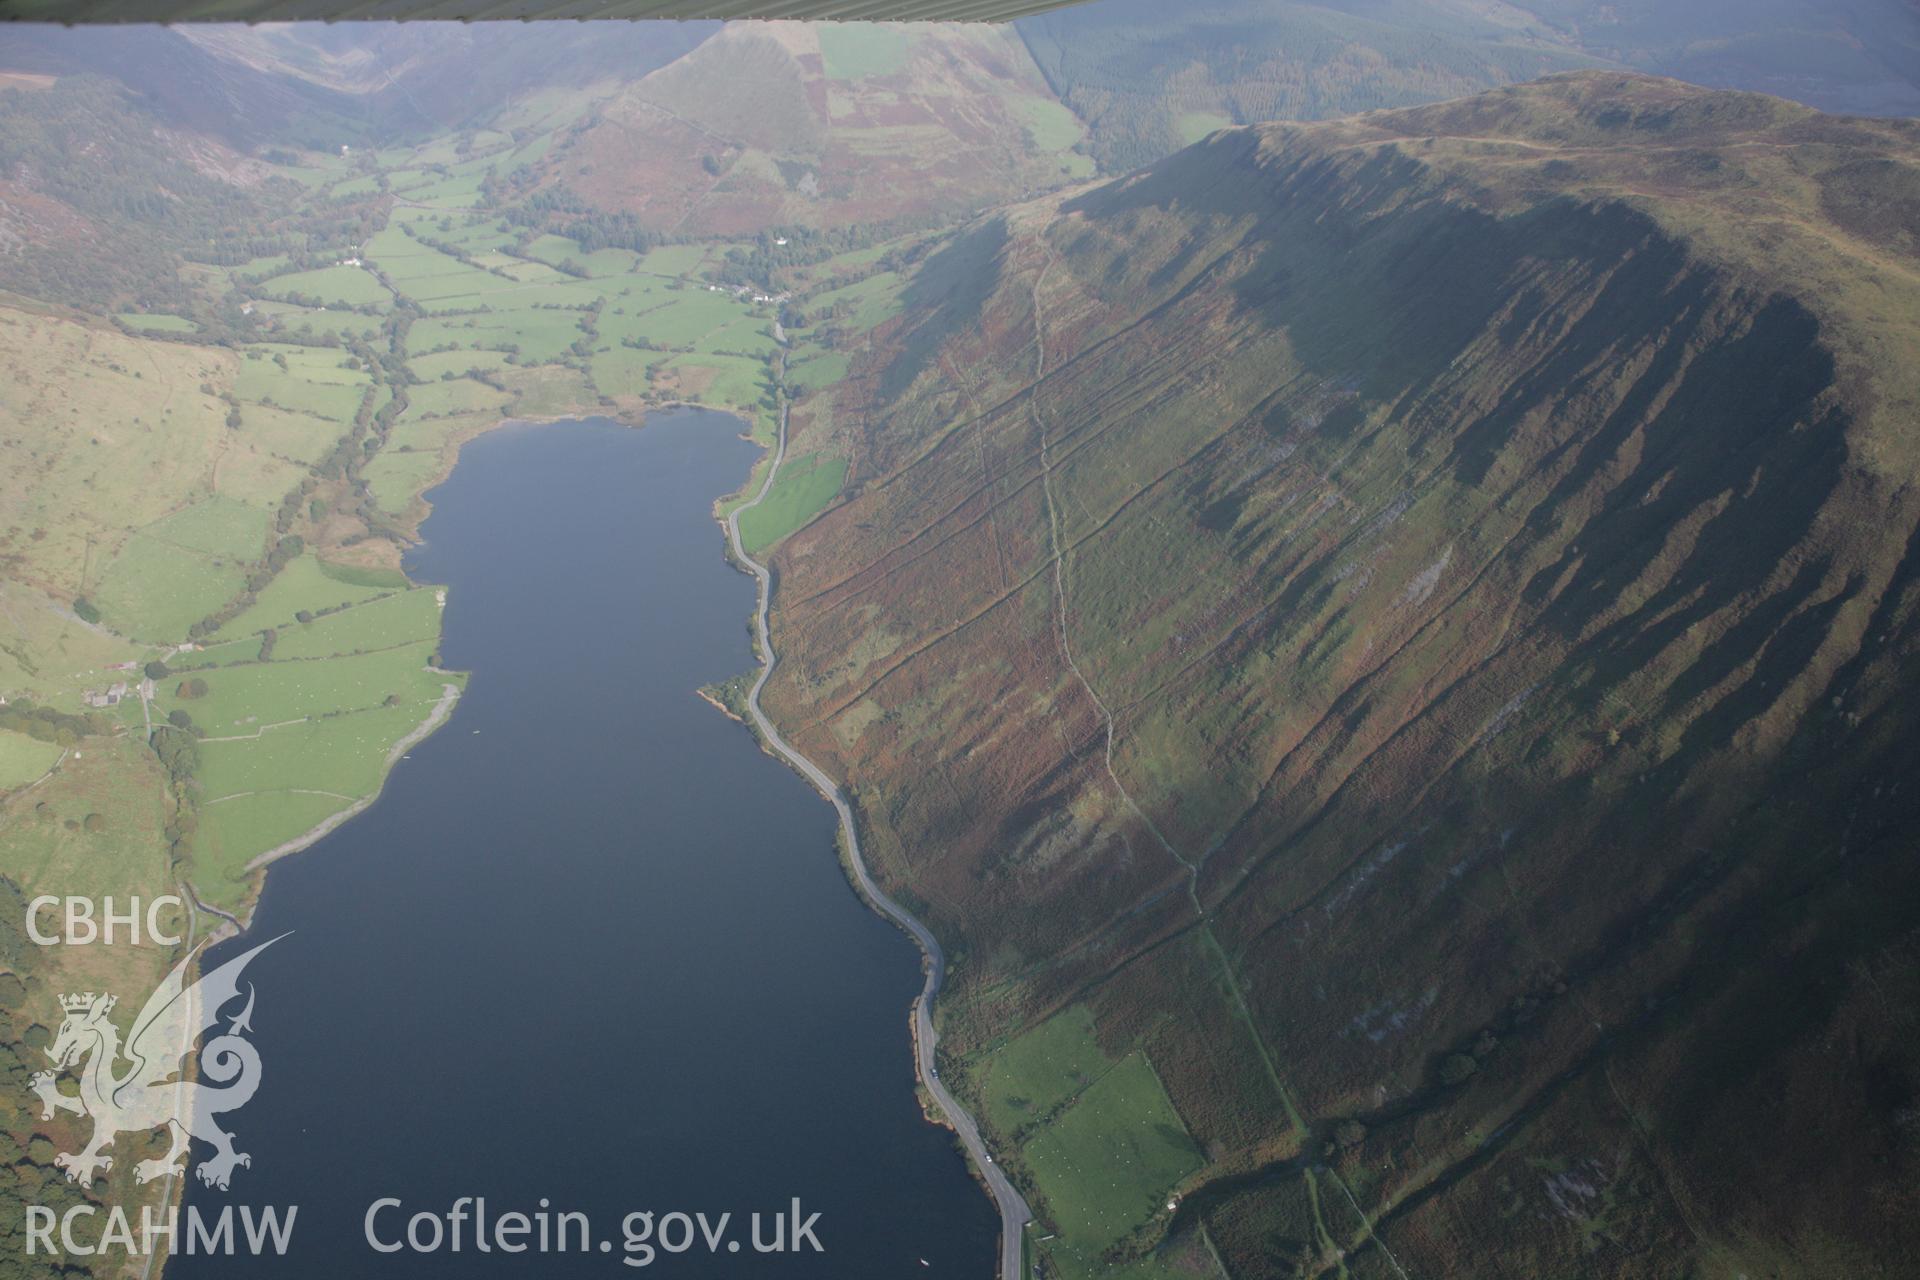 RCAHMW colour oblique aerial photograph of Tal-y-Llyn Lake looking north-east. Taken on 17 October 2005 by Toby Driver